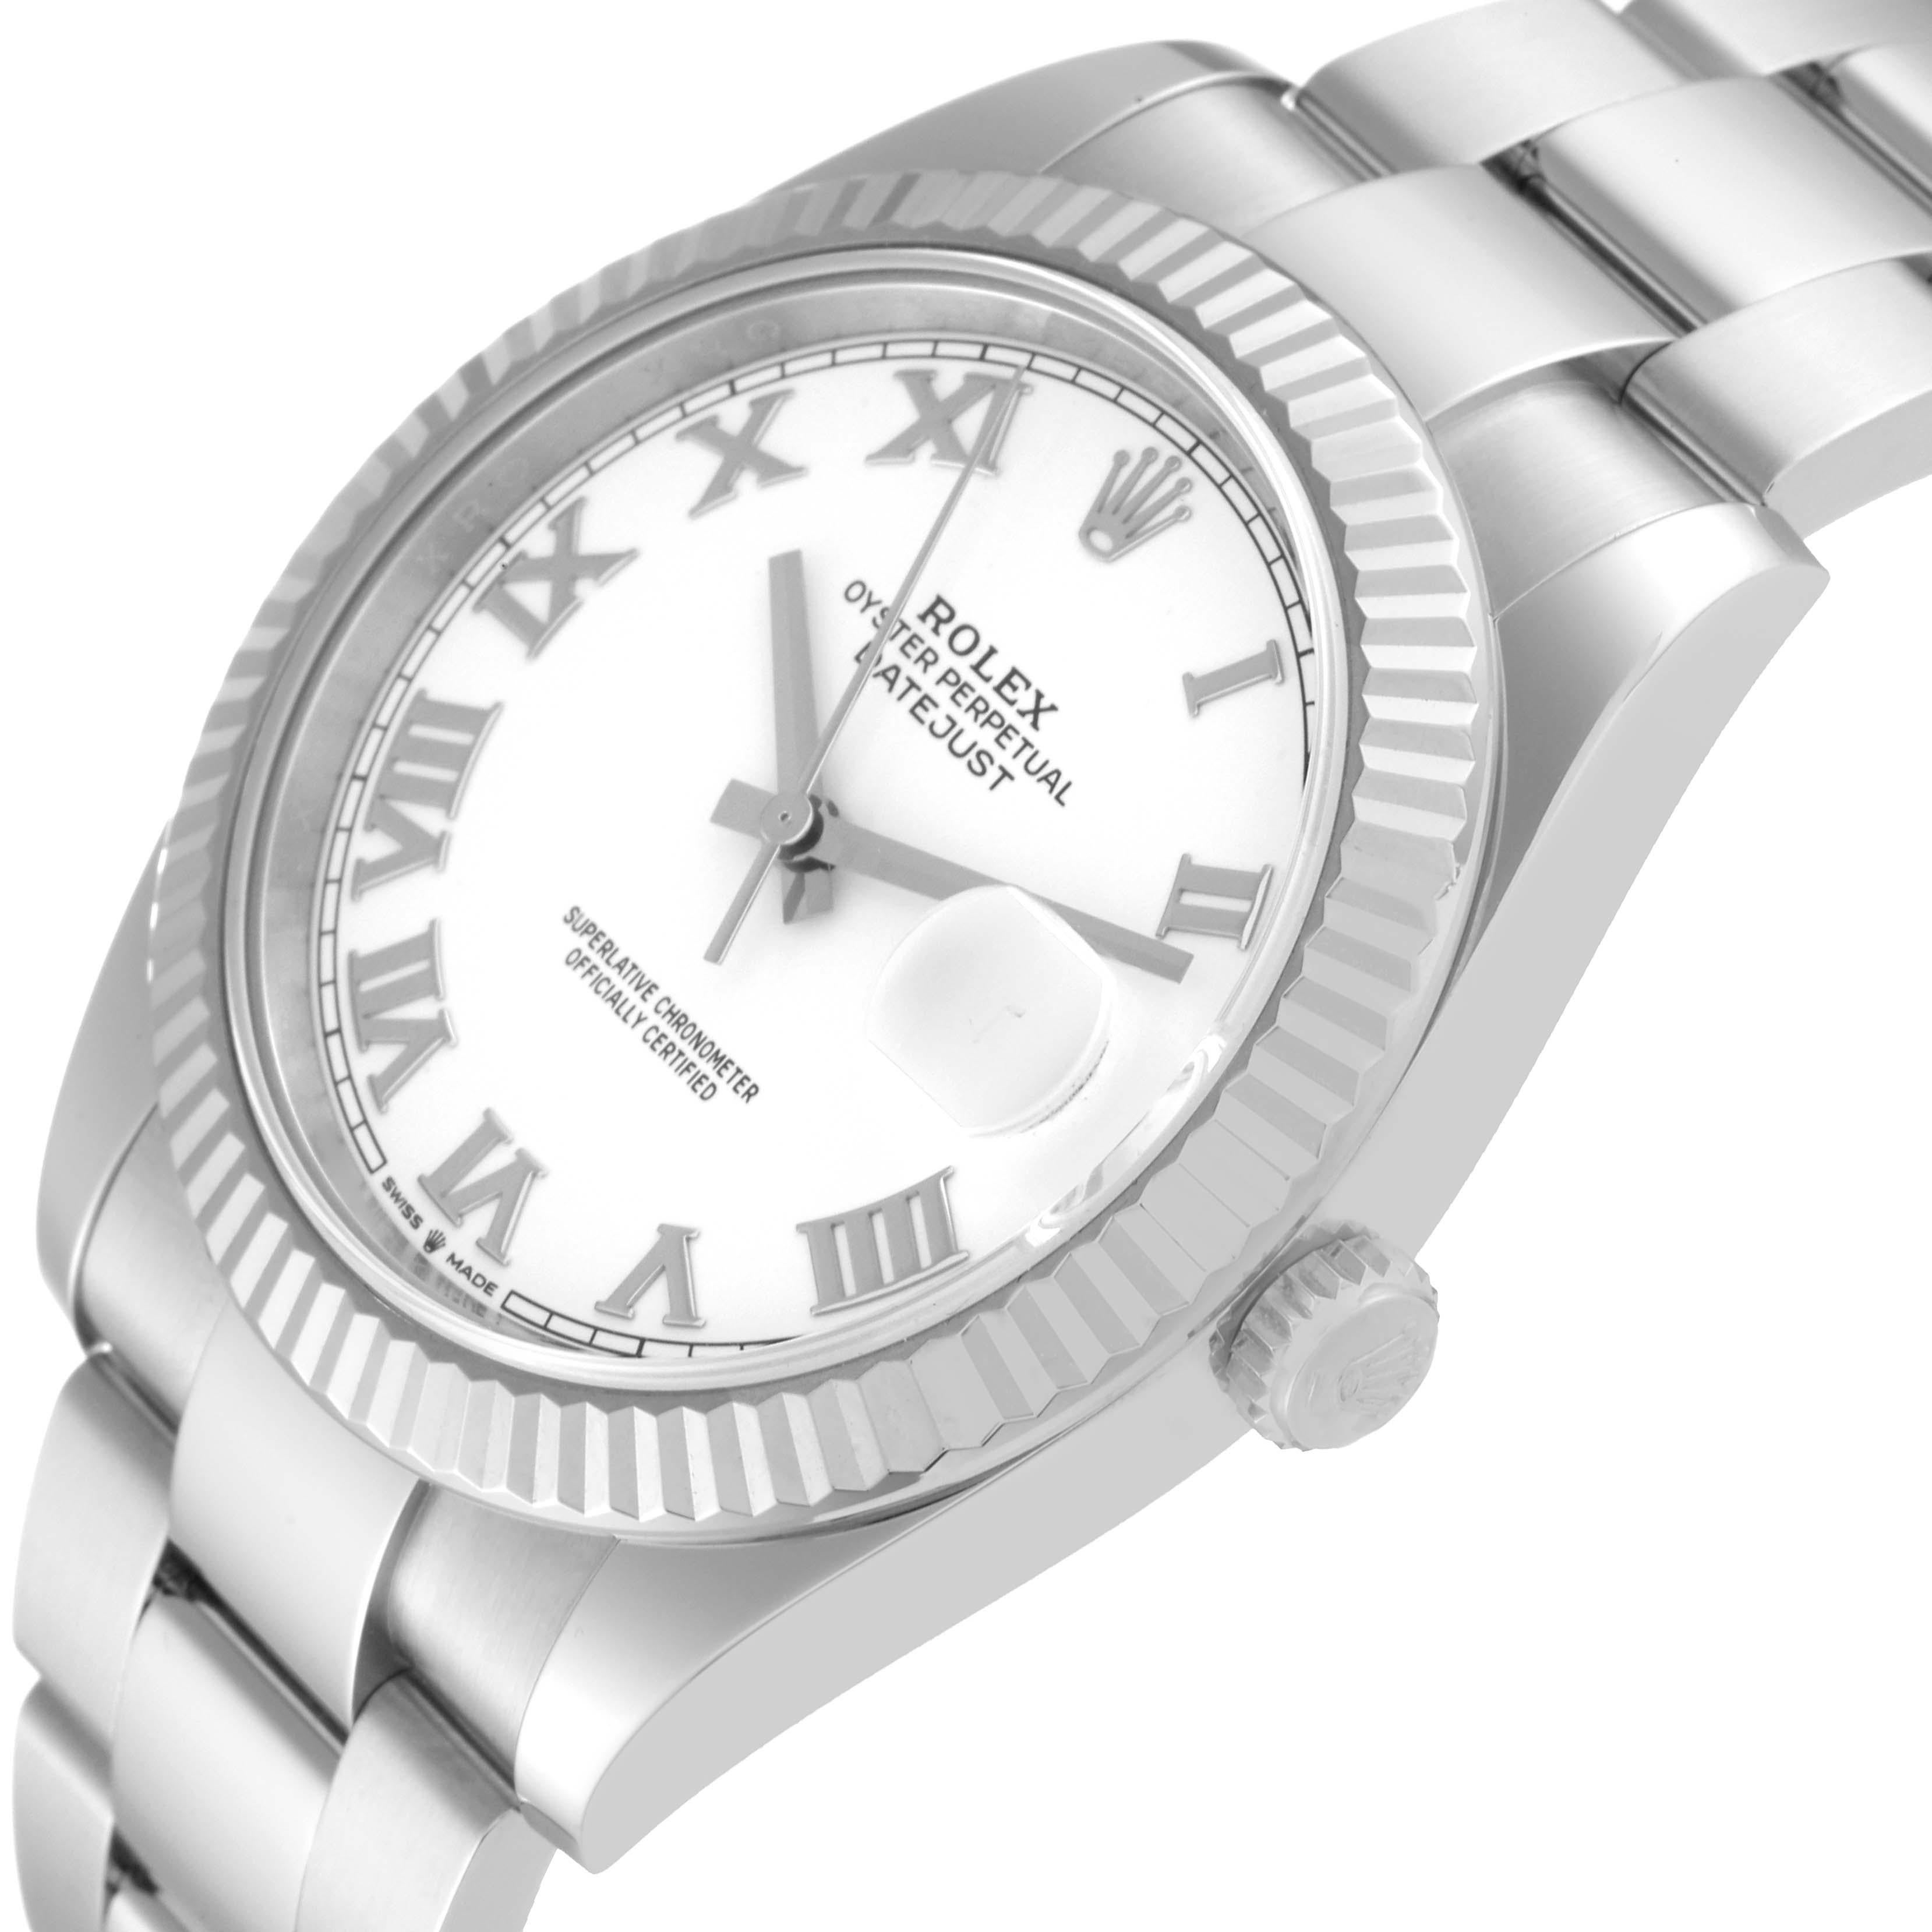 Rolex Datejust 41 Steel White Gold Roman Dial Mens Watch 126334 Box Card For Sale 1